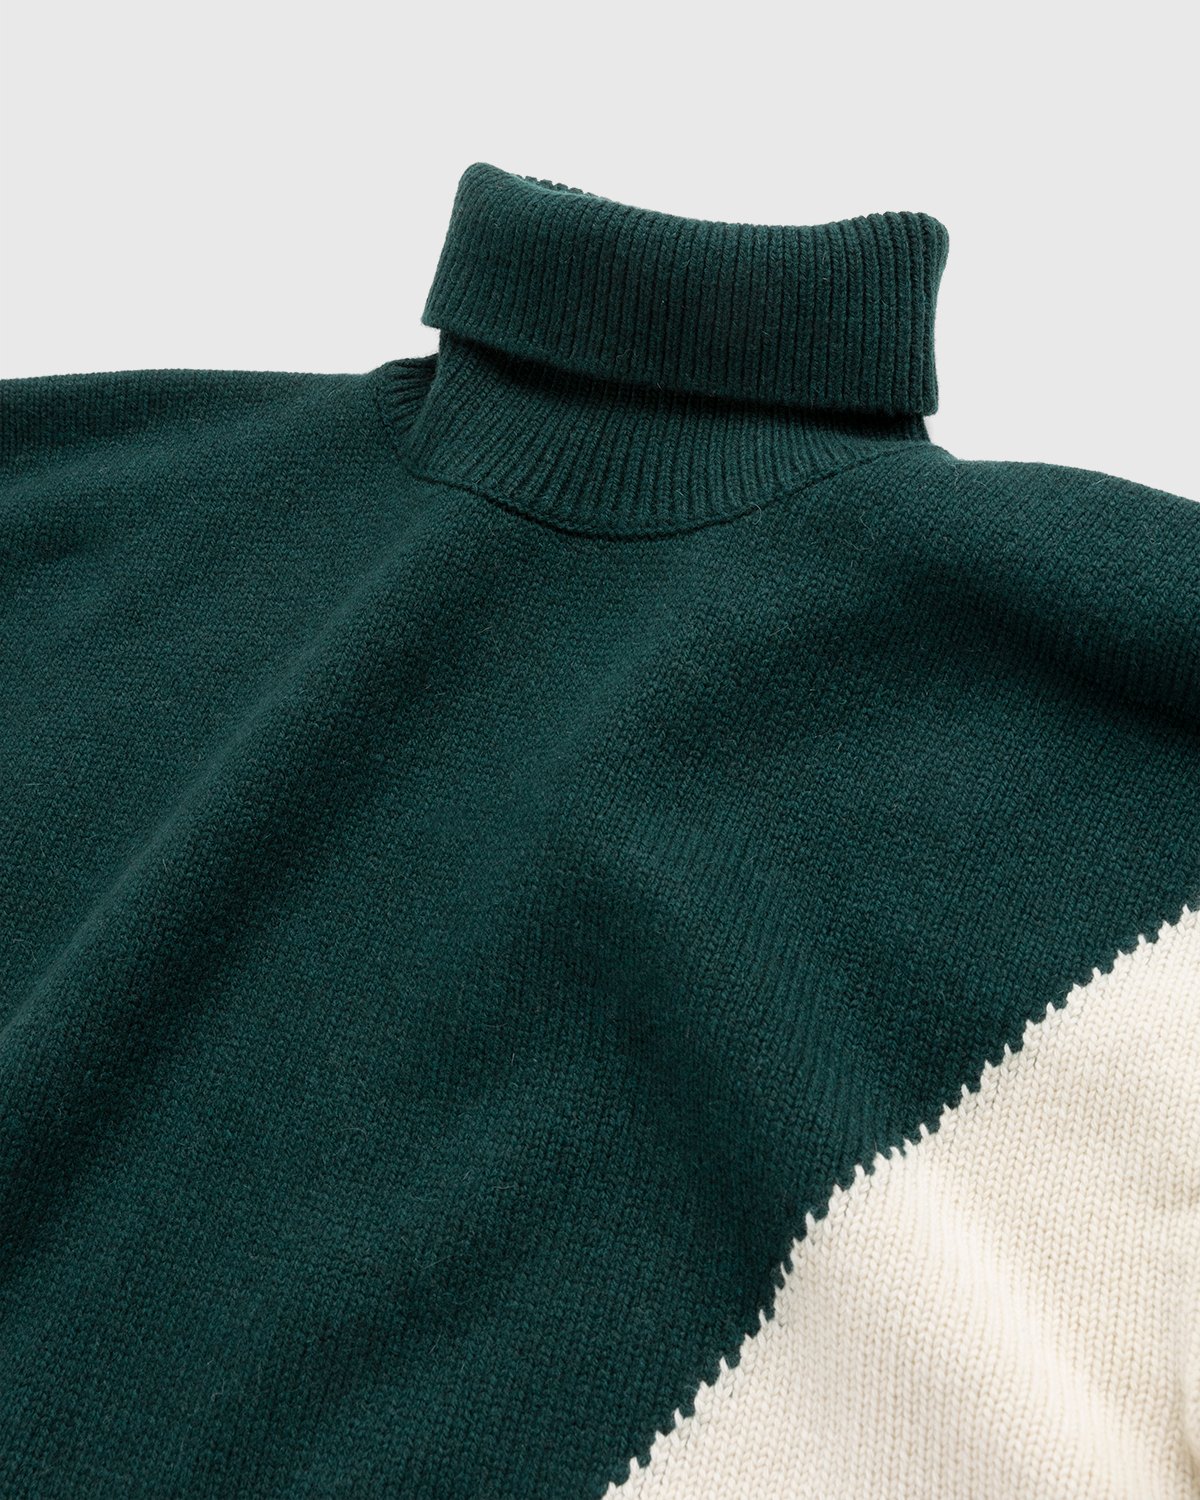 Jil Sander - Cashmere High Neck Knit Sweater Green - Clothing - Green - Image 3